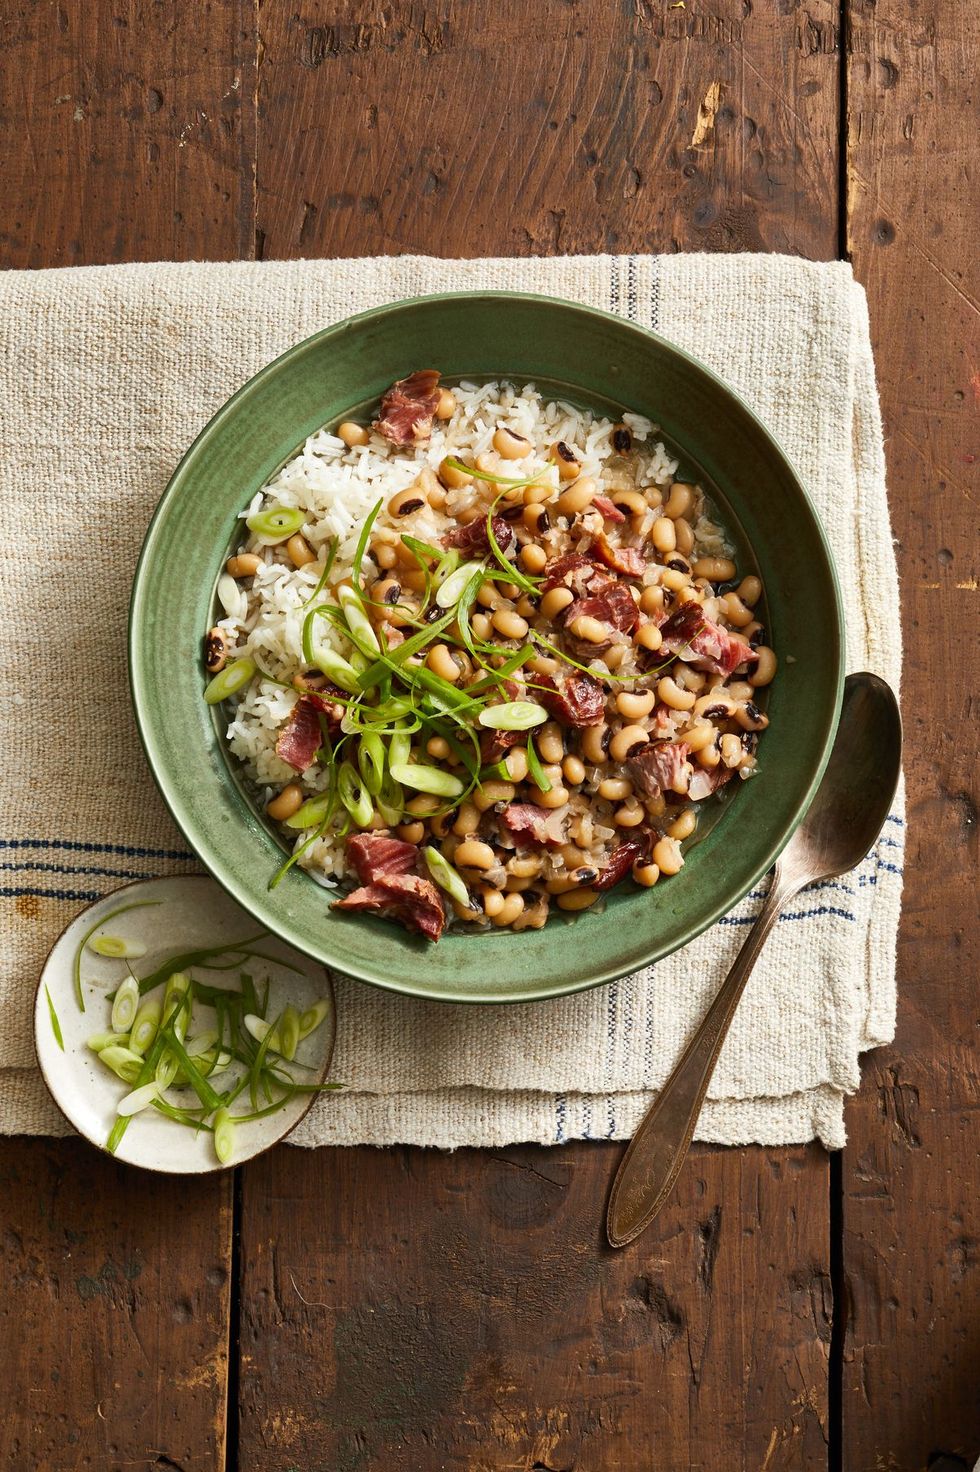 black eyed peas over rice in a green bowl